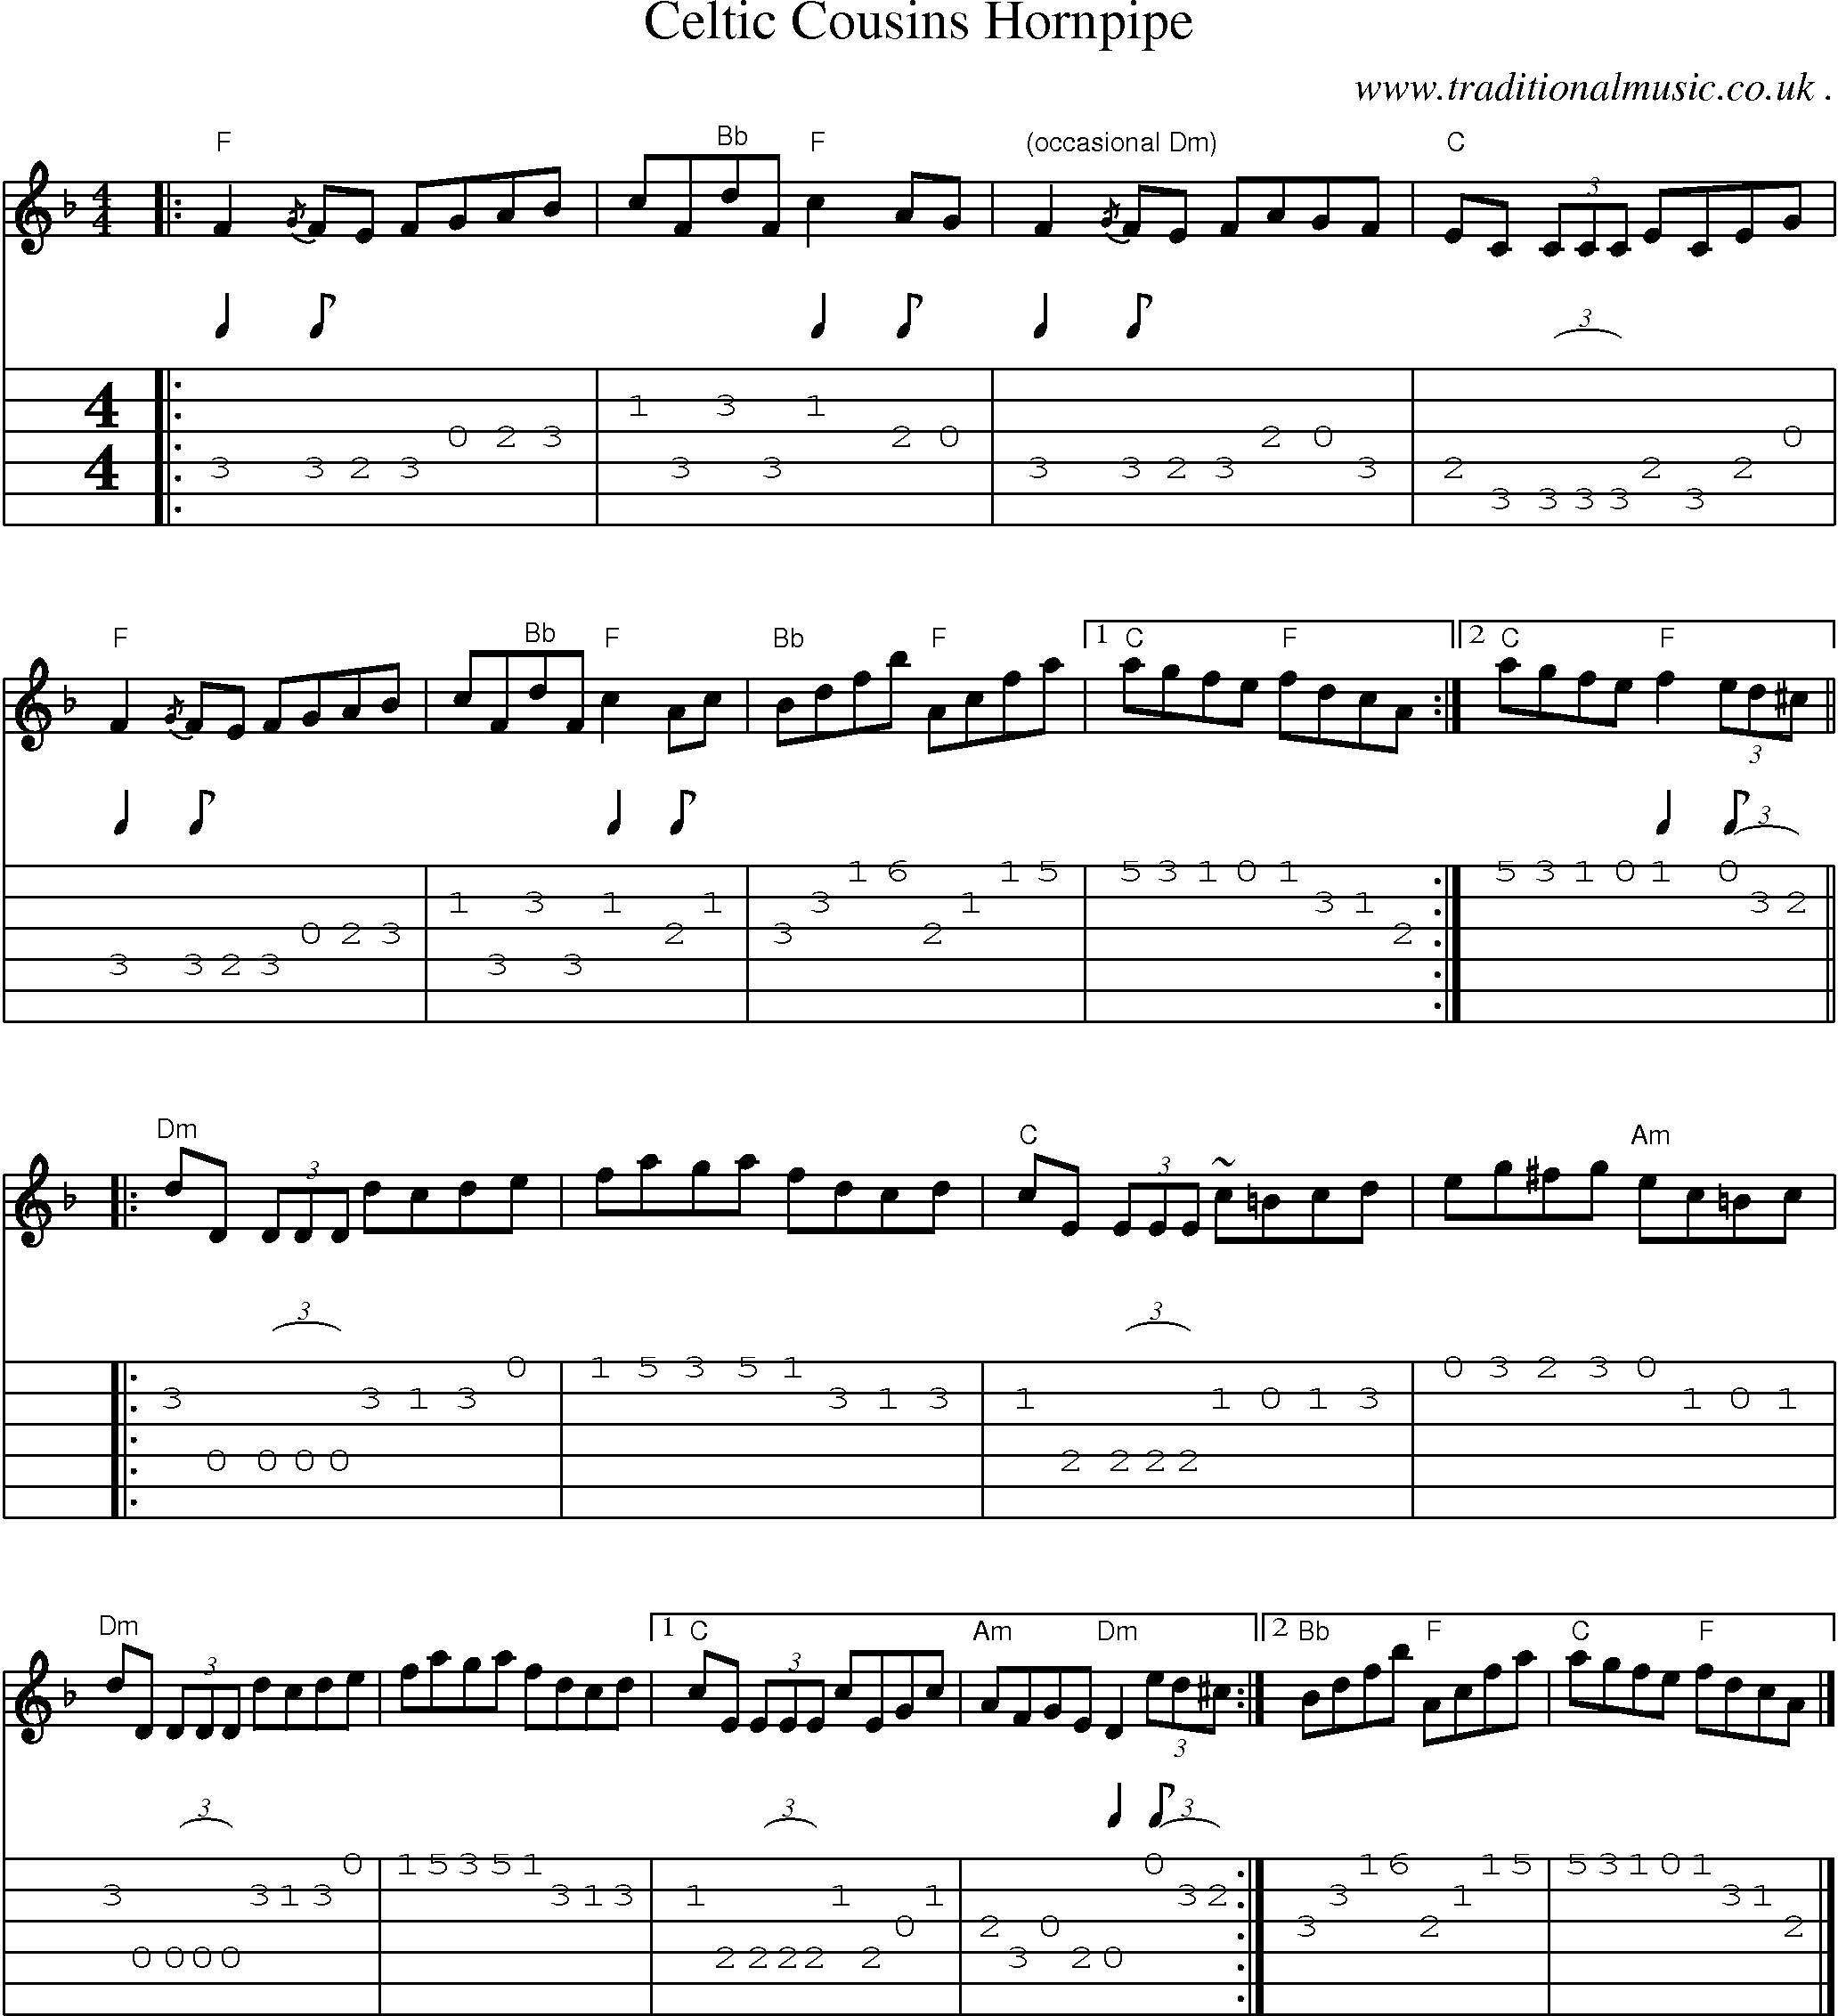 Music Score and Guitar Tabs for Celtic Cousins Hornpipe